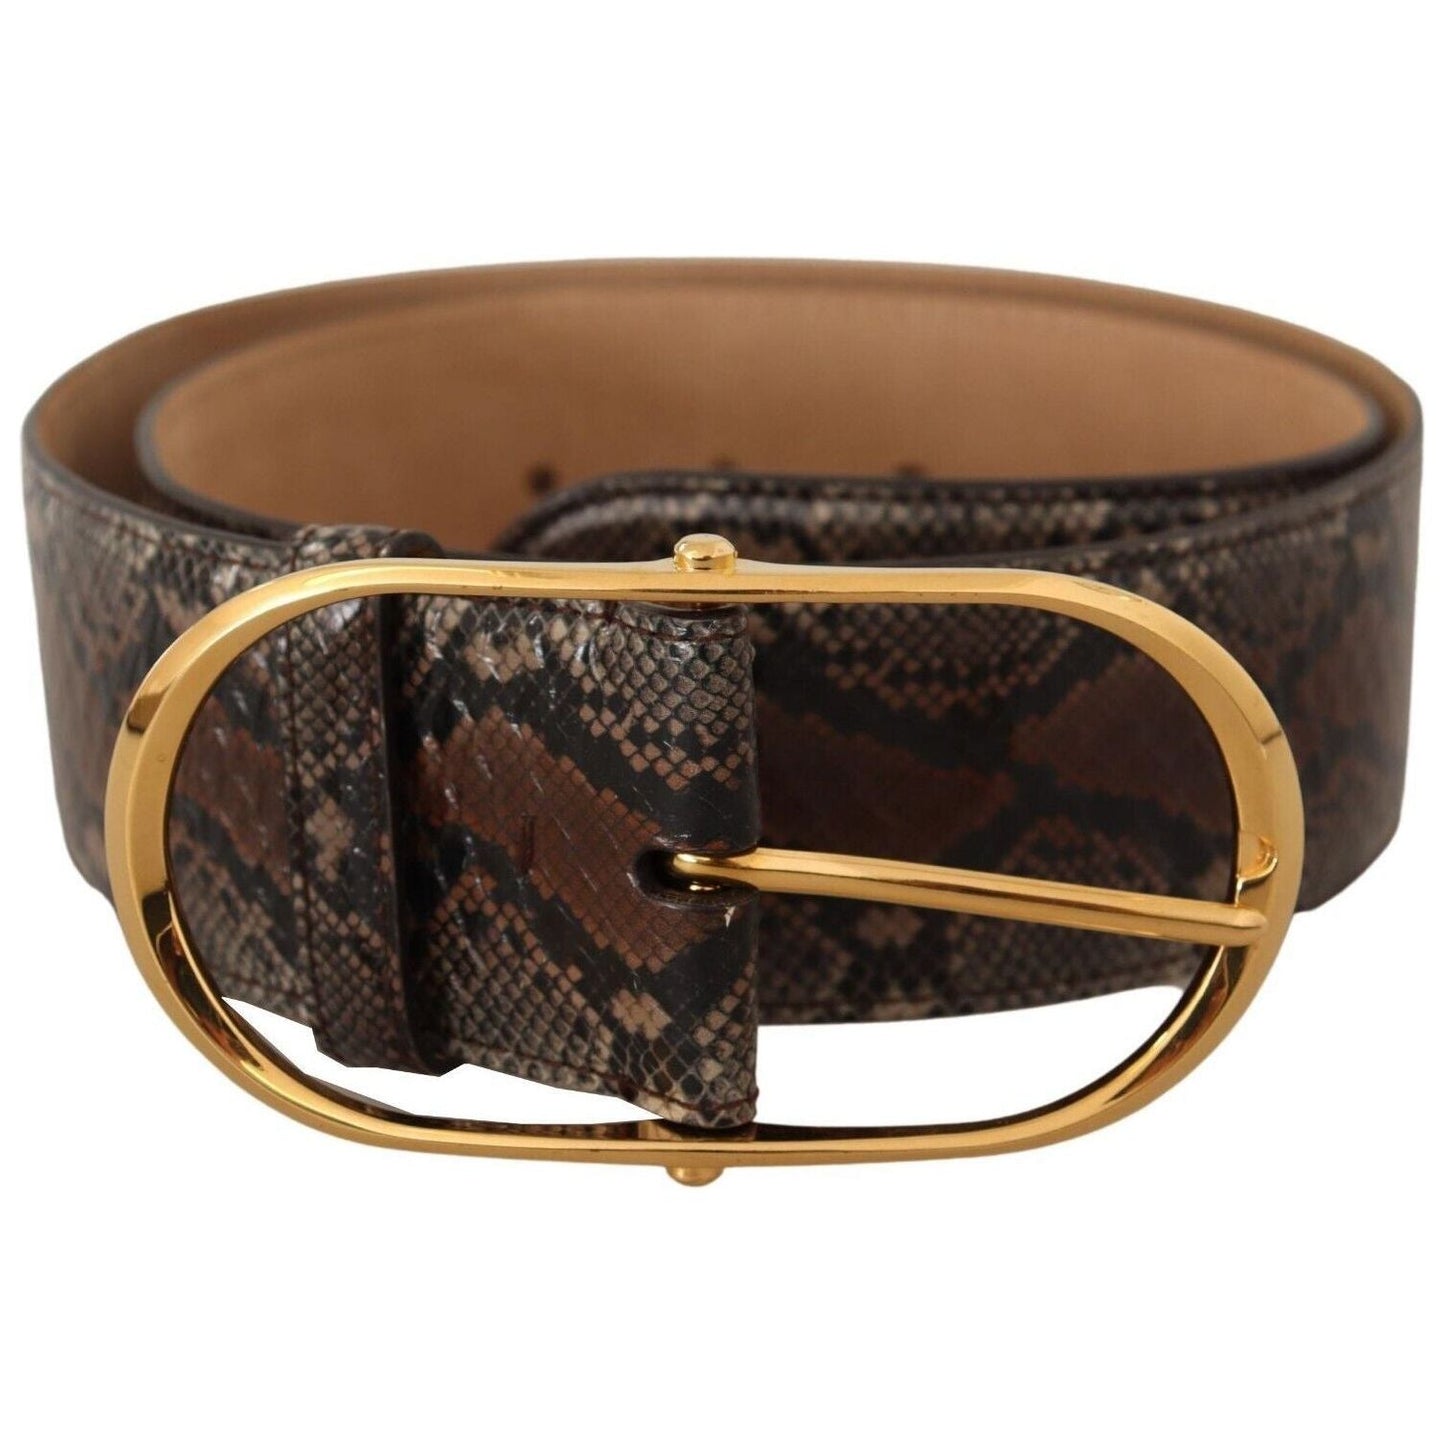 Dolce & Gabbana Elegant Brown Leather Belt with Gold Buckle brown-exotic-leather-gold-oval-buckle-belt-5 WOMAN BELTS s-l1600-2-276-f01ab159-7ee.jpg